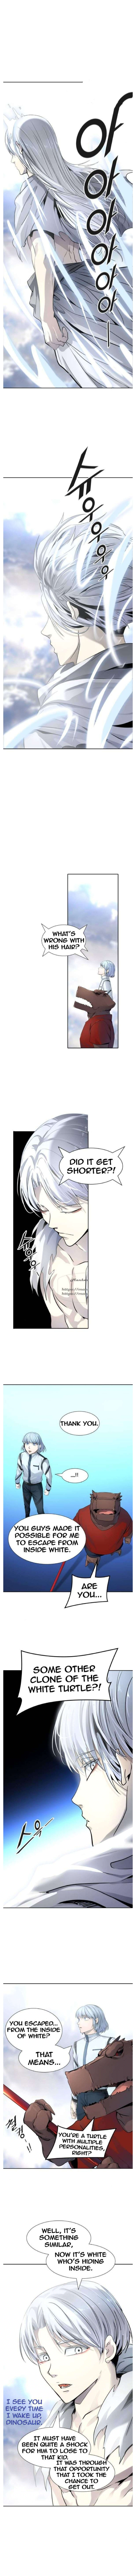 tower of god 514, tower of god 514, Read tower of god 514, tower of god 514 Manga, tower of god 514 english, tower of god 514 raw manga, tower of god 514 online, tower of god 514 high quality, tower of god 514 chapter, tower of god 514 manga scan